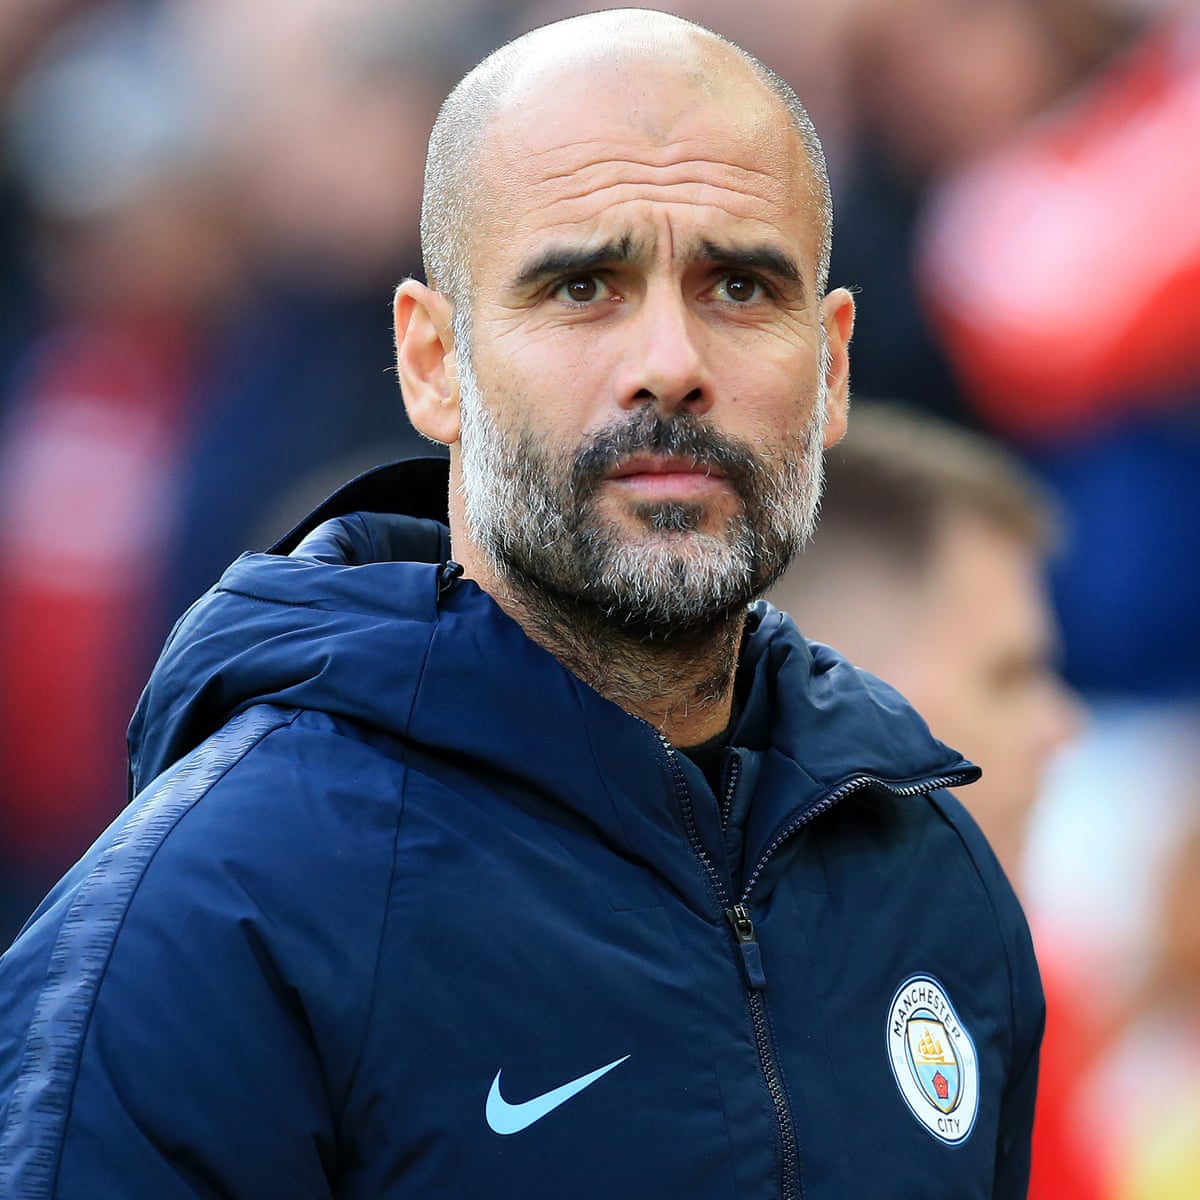 Guardiola Believes Liverpool Still Have a Title Chance